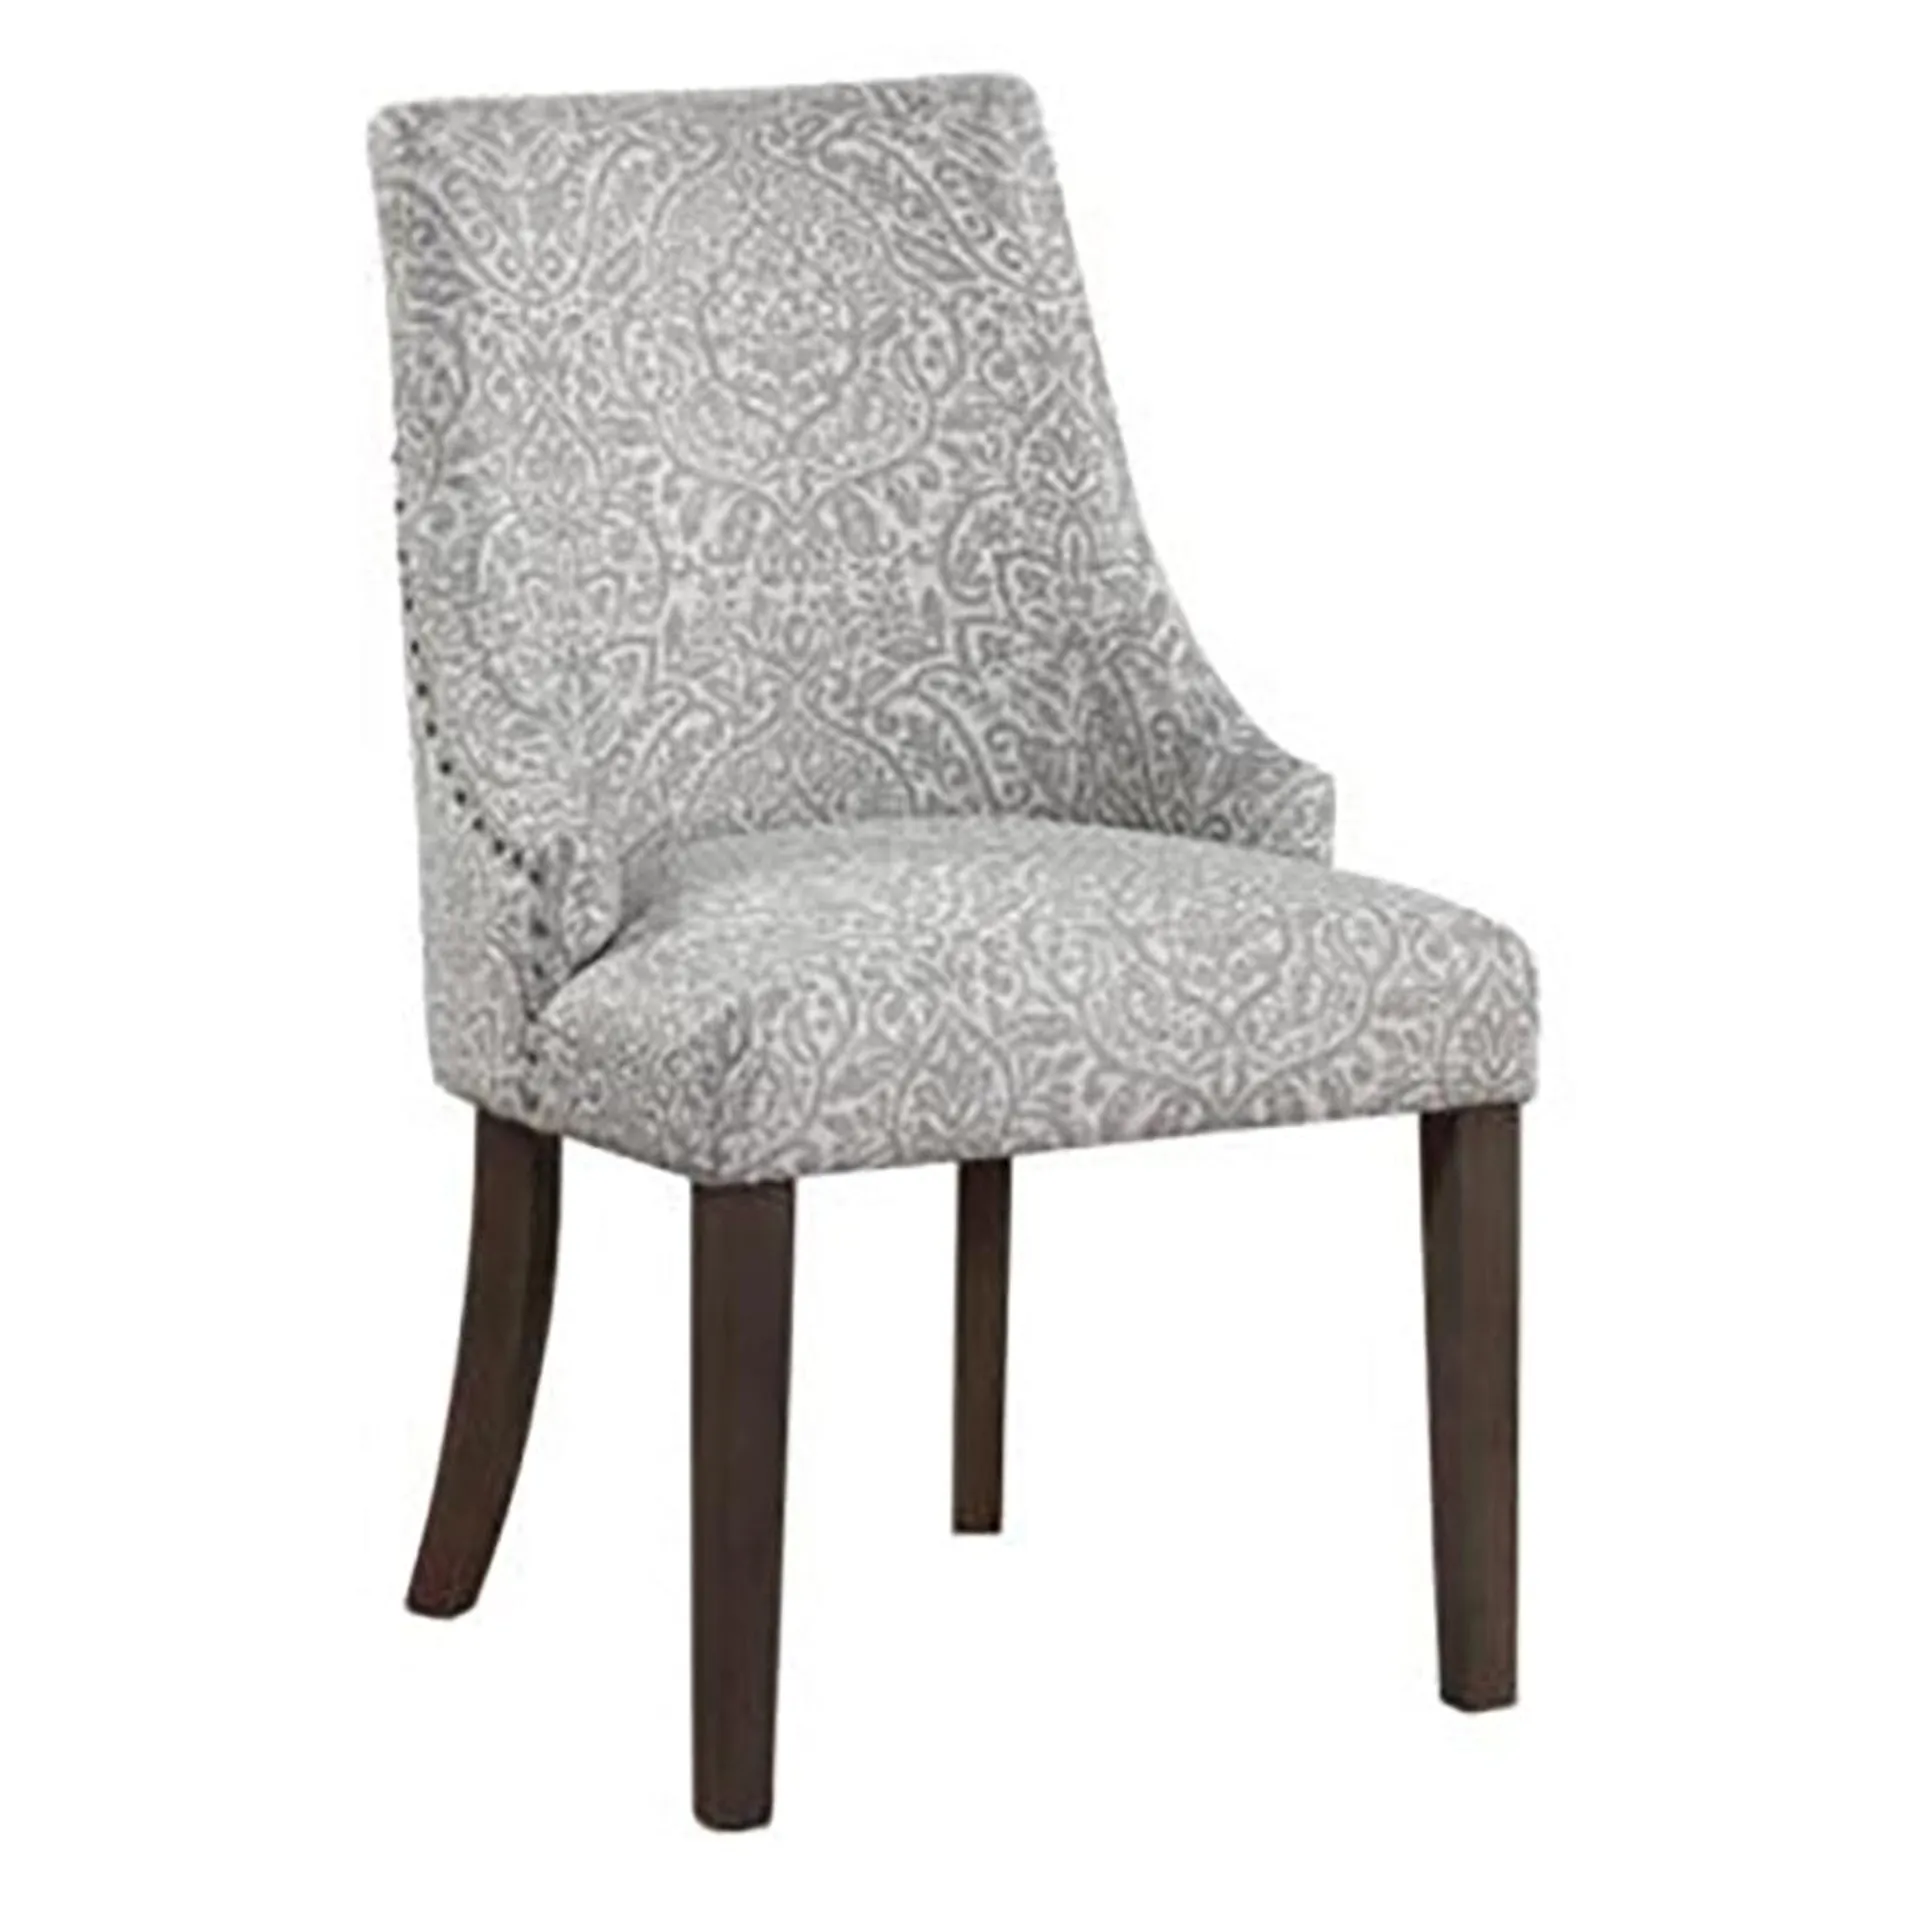 Pauline Dining Chair (2 colors)